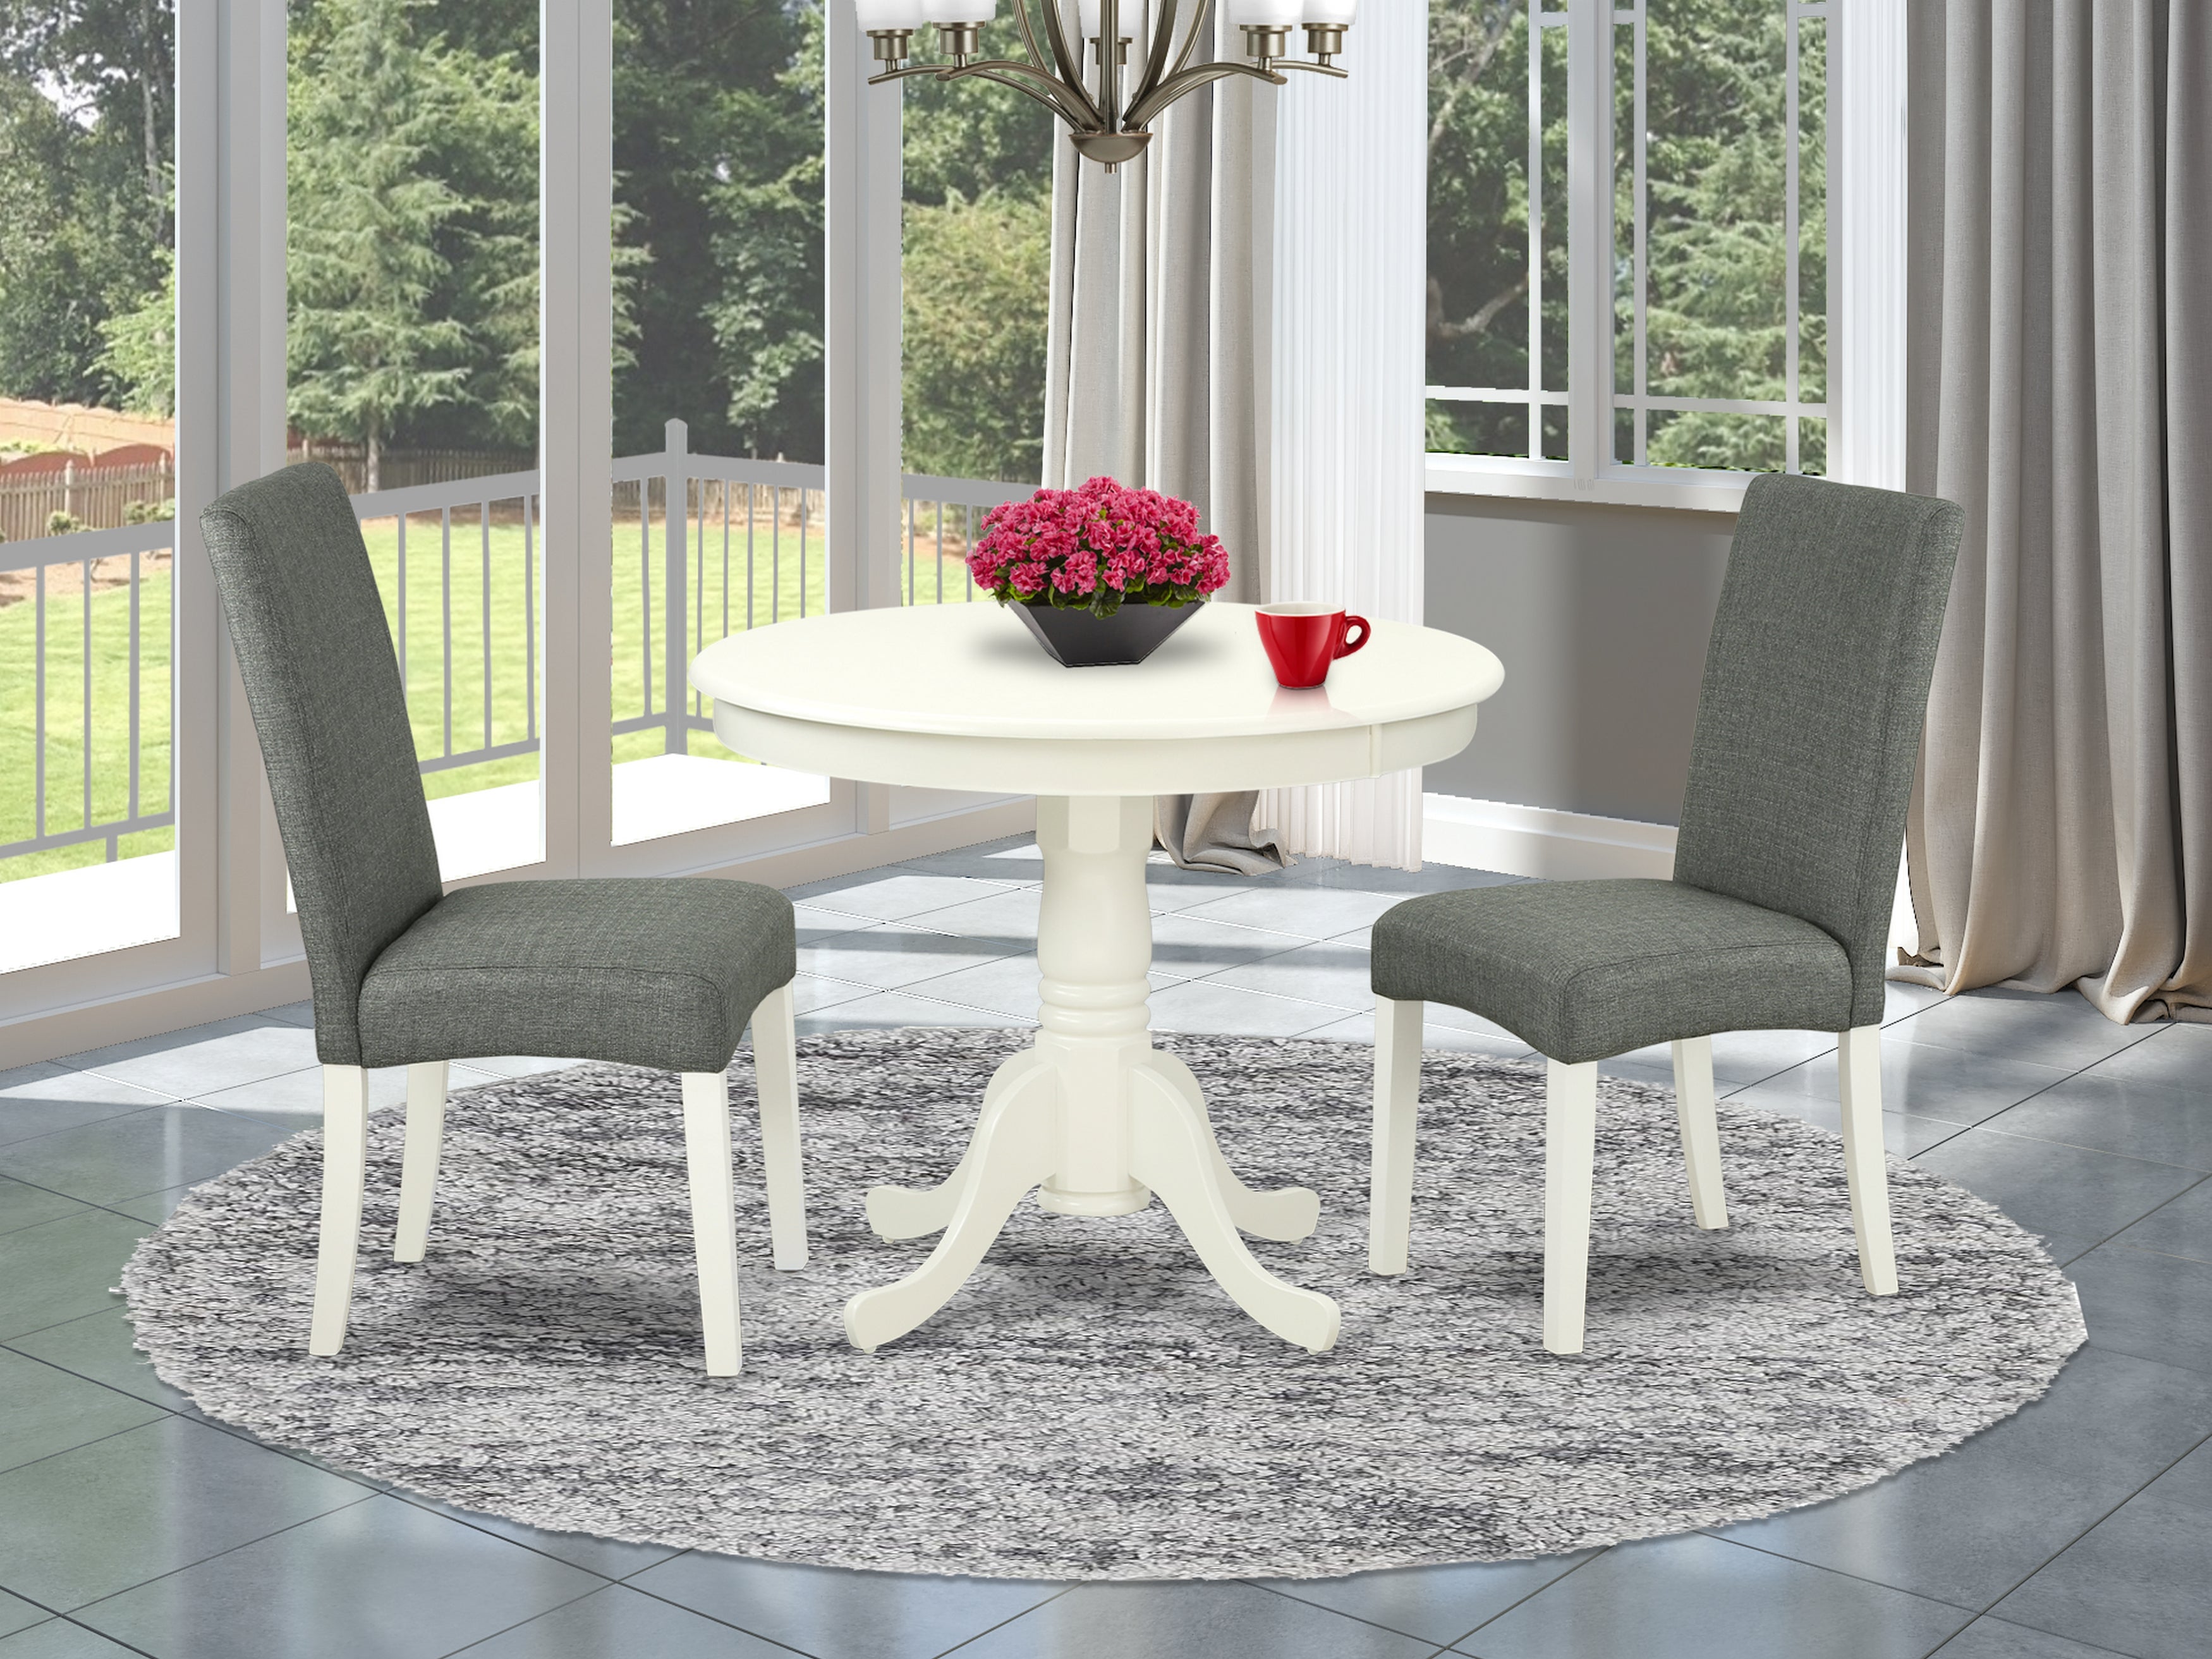 ANDR3-LWH-07 3Pc Round 36" Table And A Pair Of Parson Chair With Linen White Finish Leg And Linen Fabric- Gray Color